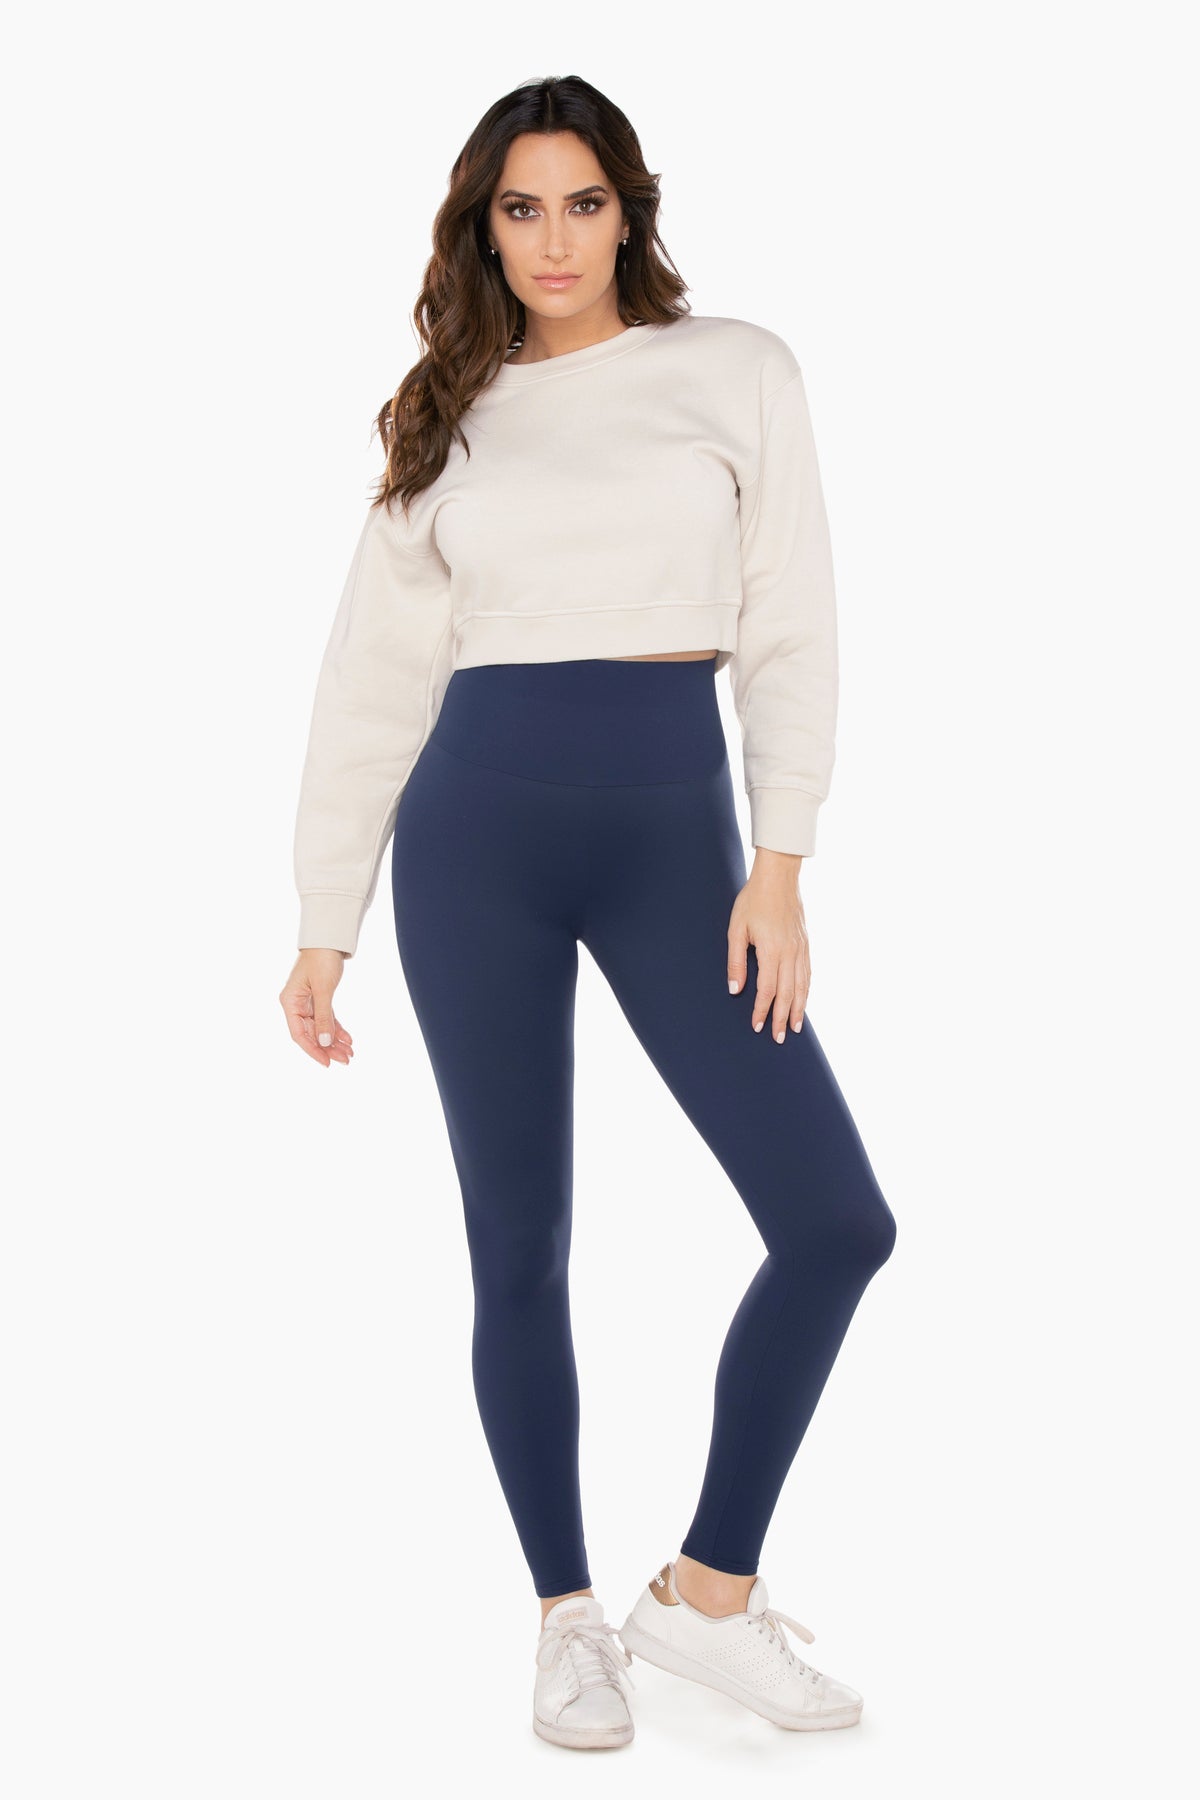 Buy Blue Pintuck Tights Online - Shop for W